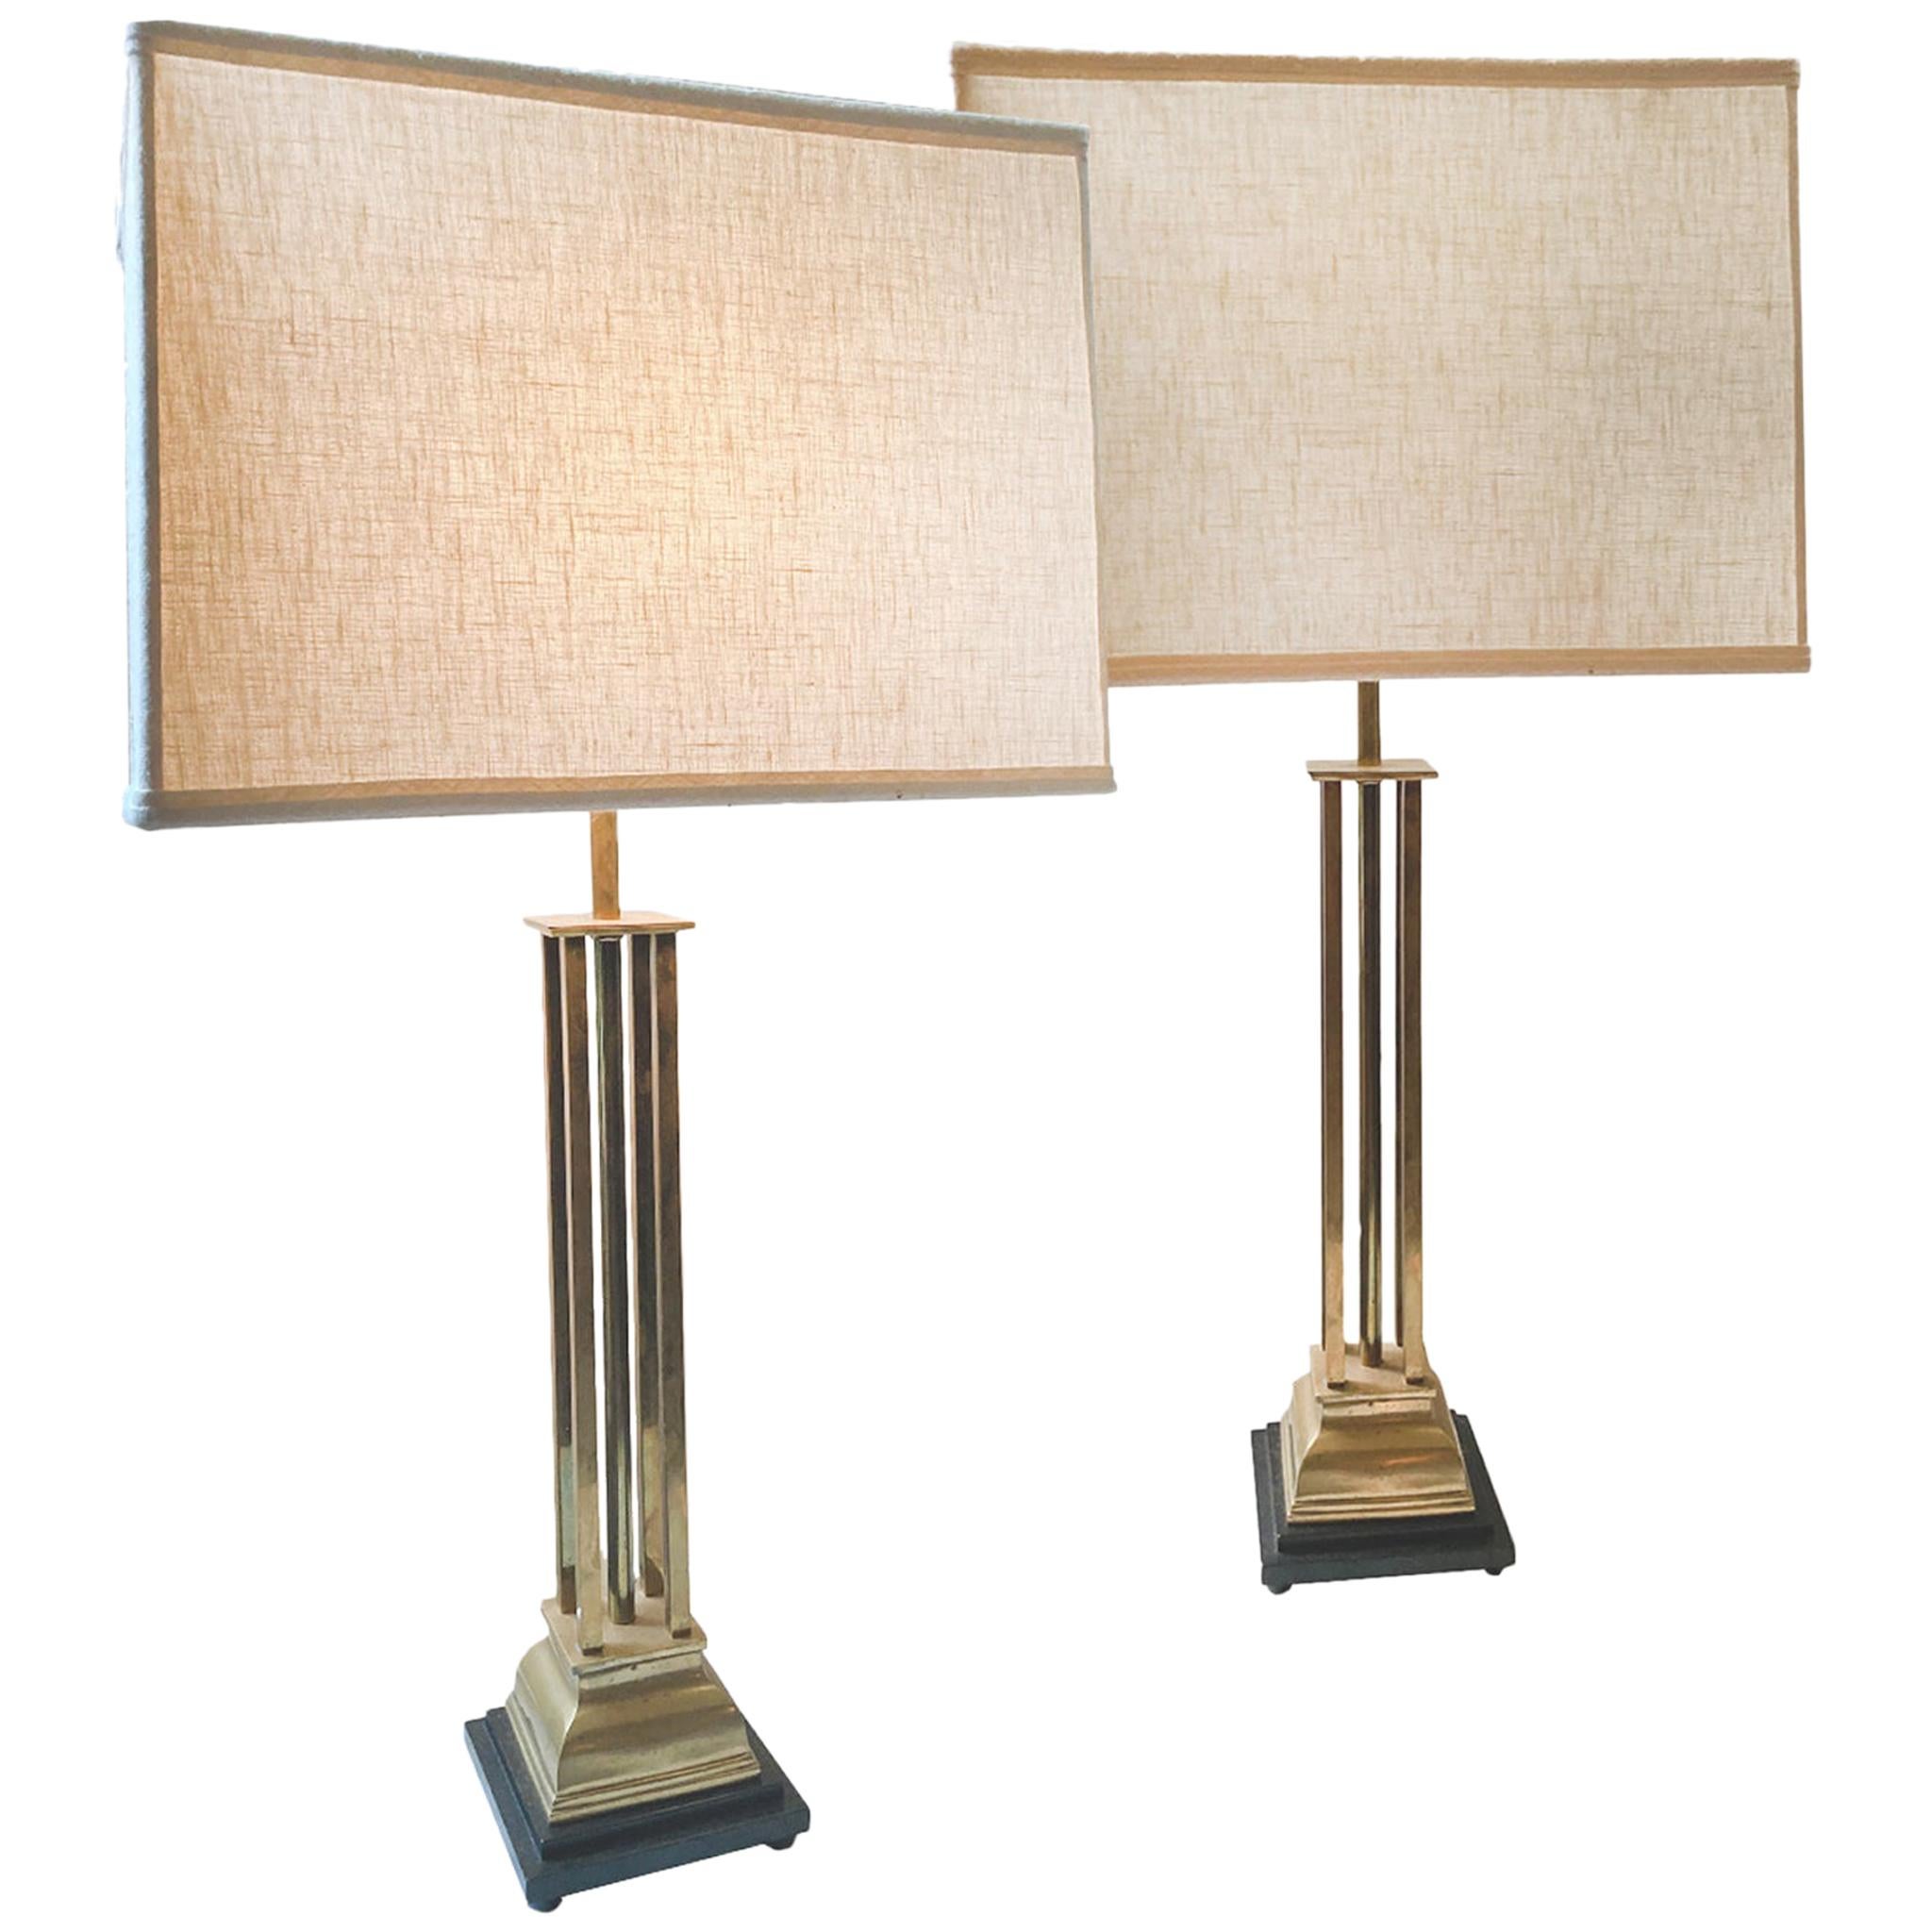 Pair of 1970s Hollywood Regency Style Brass Table Lamps